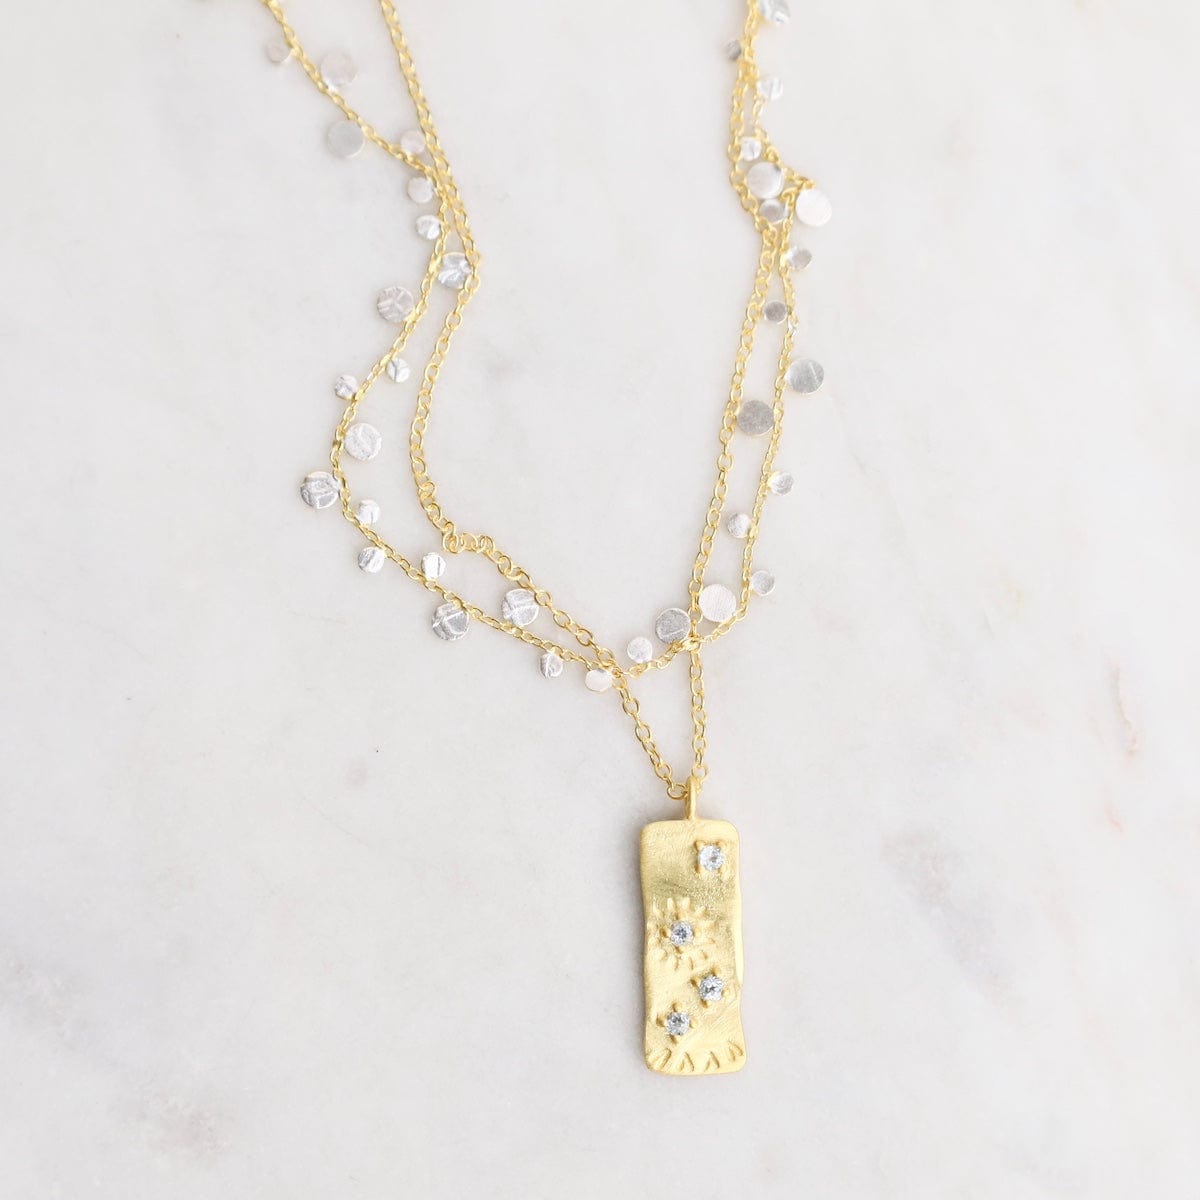 NKL-GPL Etched Rectangle with Blue Topaz Pendant Necklace